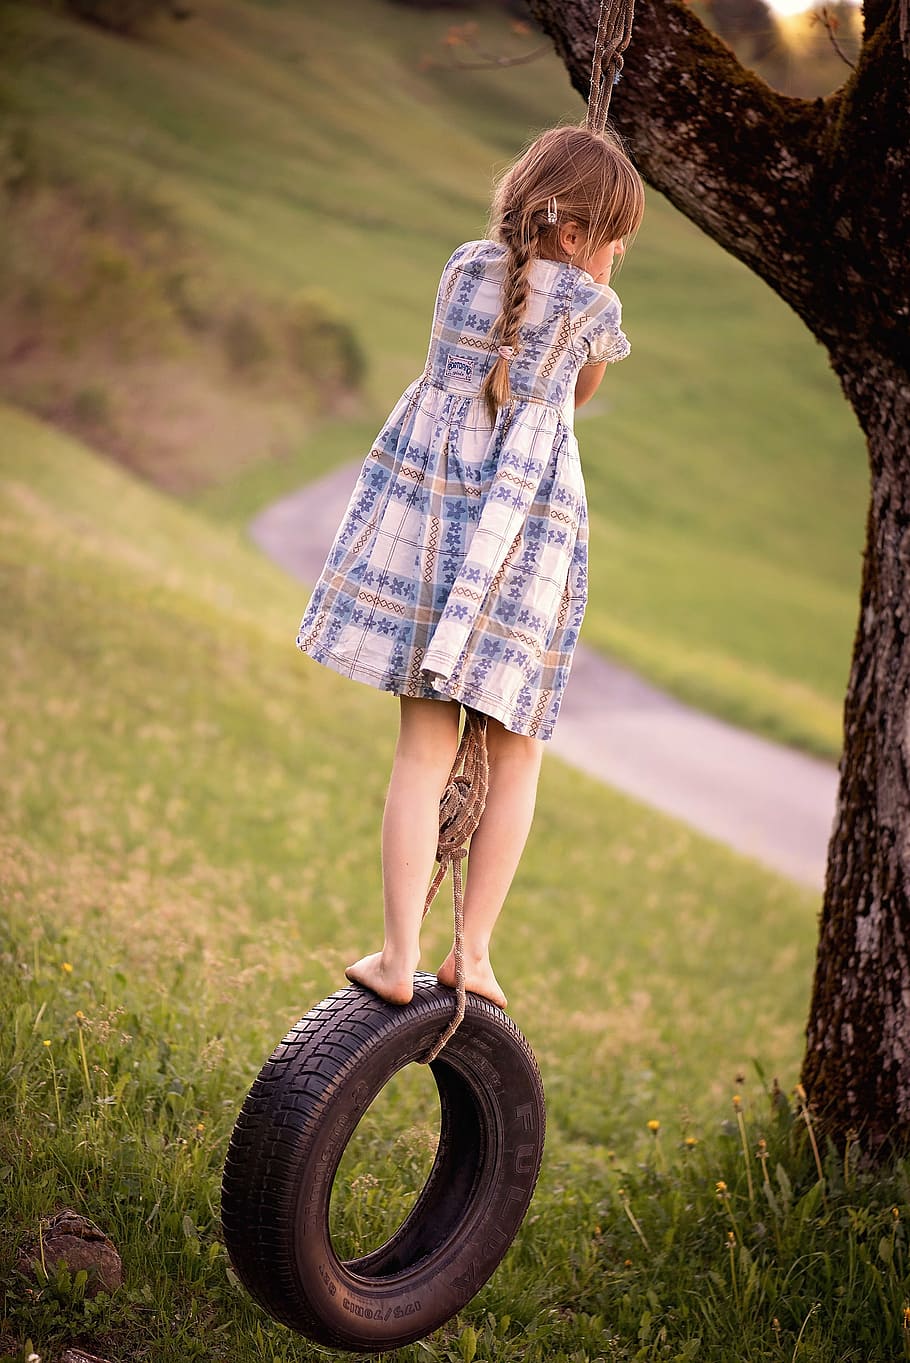 girl, ride, vehicle tire swing, human, person, child, blond, long hair, swing, tire swing